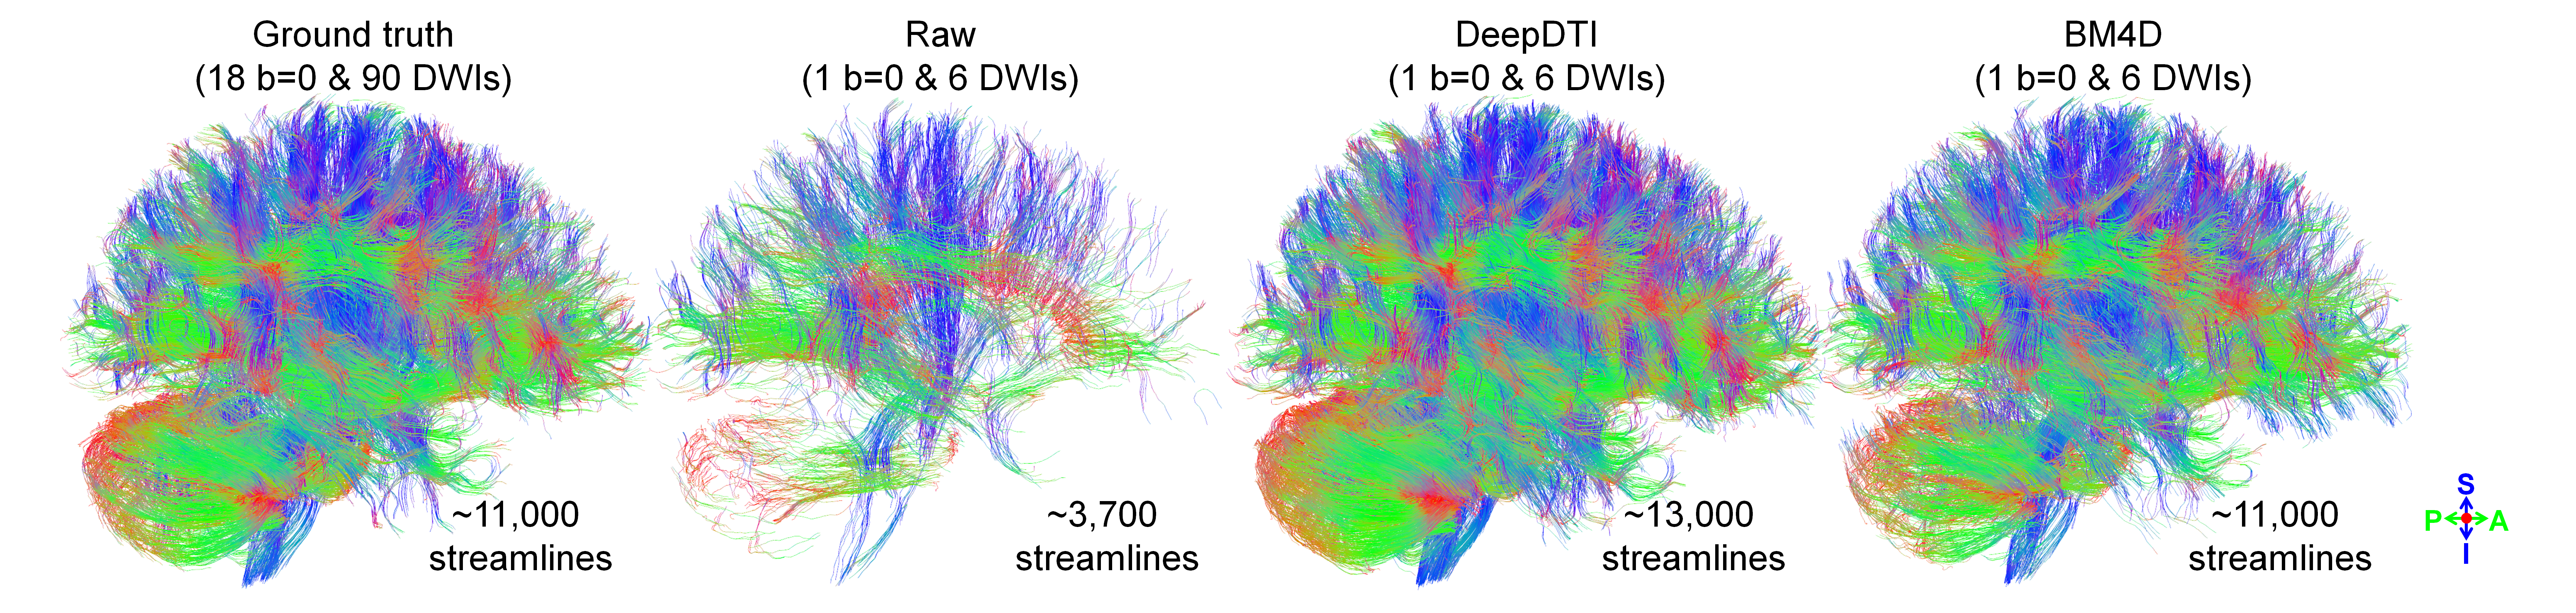 Comparison of tractography results